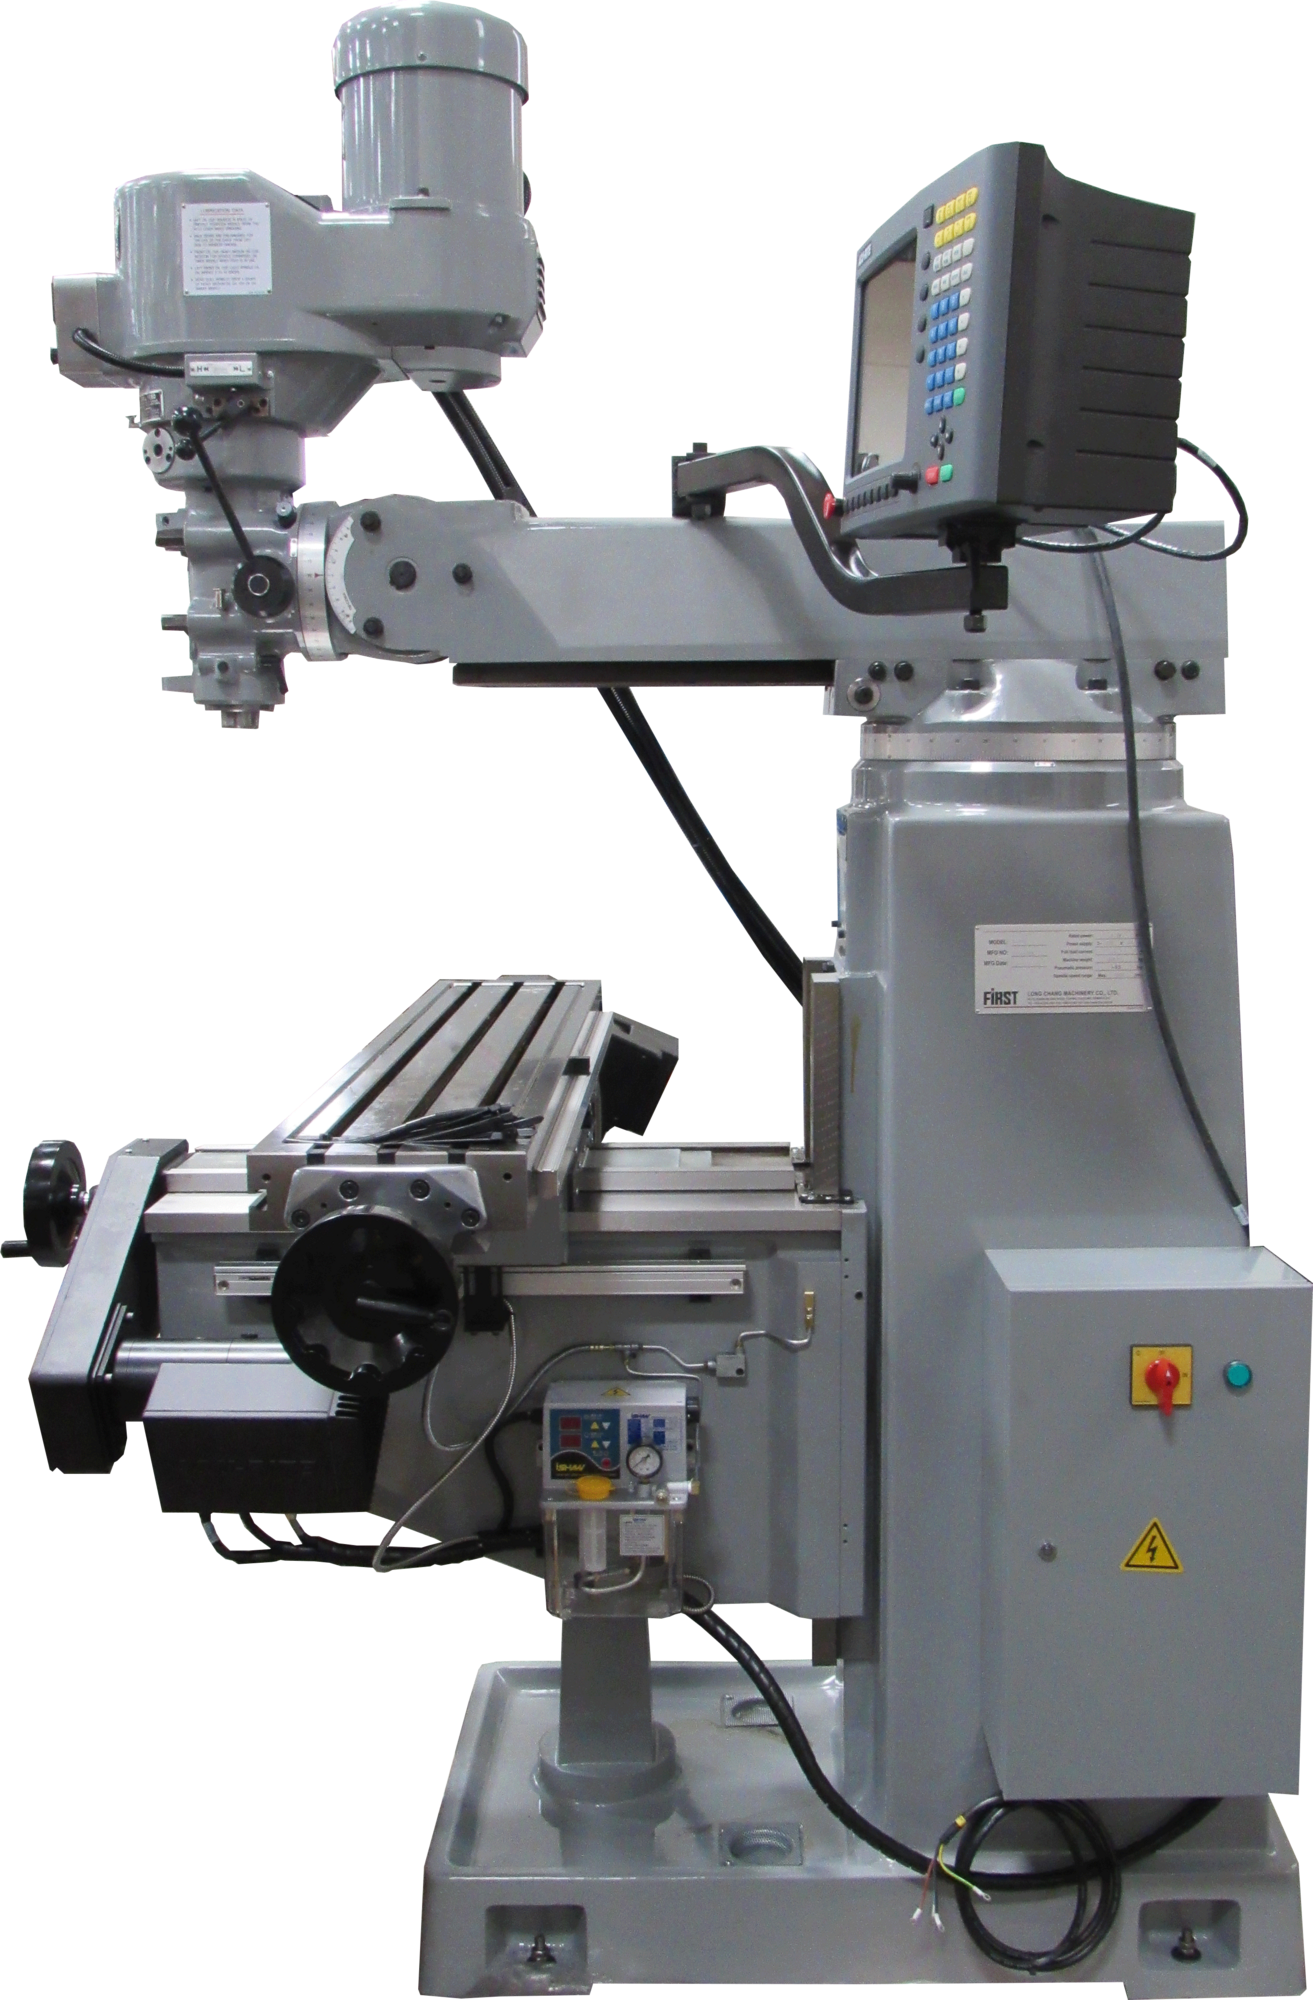 2021 ACRA LCM 42 & 50 2 & 3 Axis Control Vertical Milling Machine | Myers Technology Co., LLC